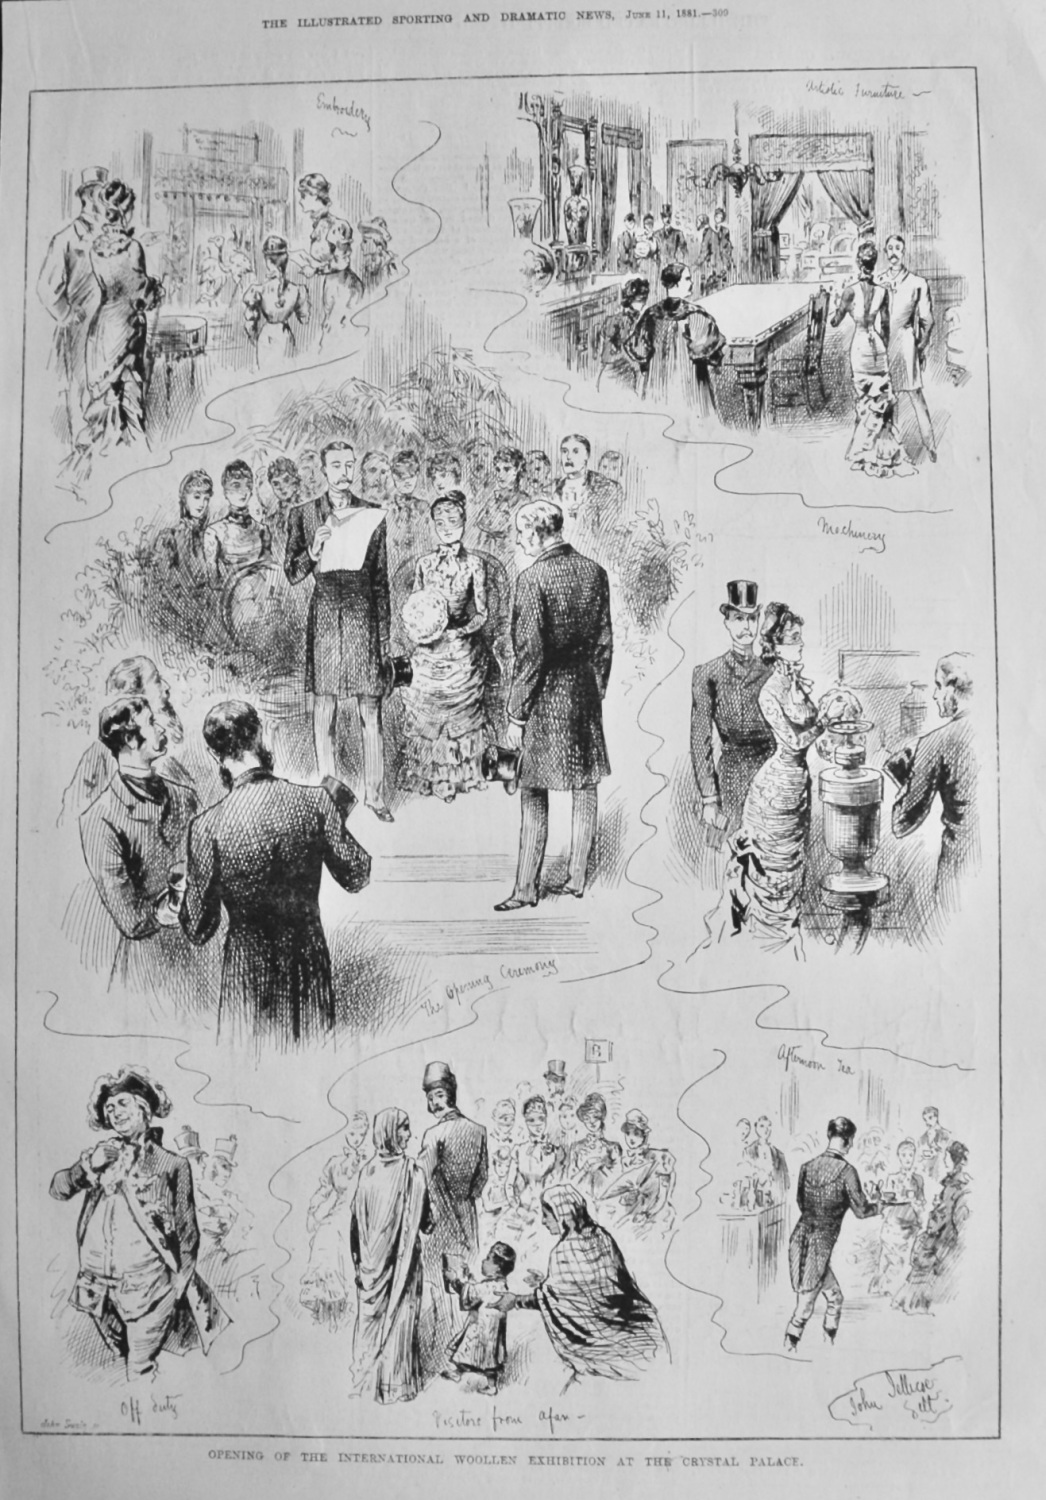 Opening of the International Woollen Exhibition at the Crystal Palace. 1881